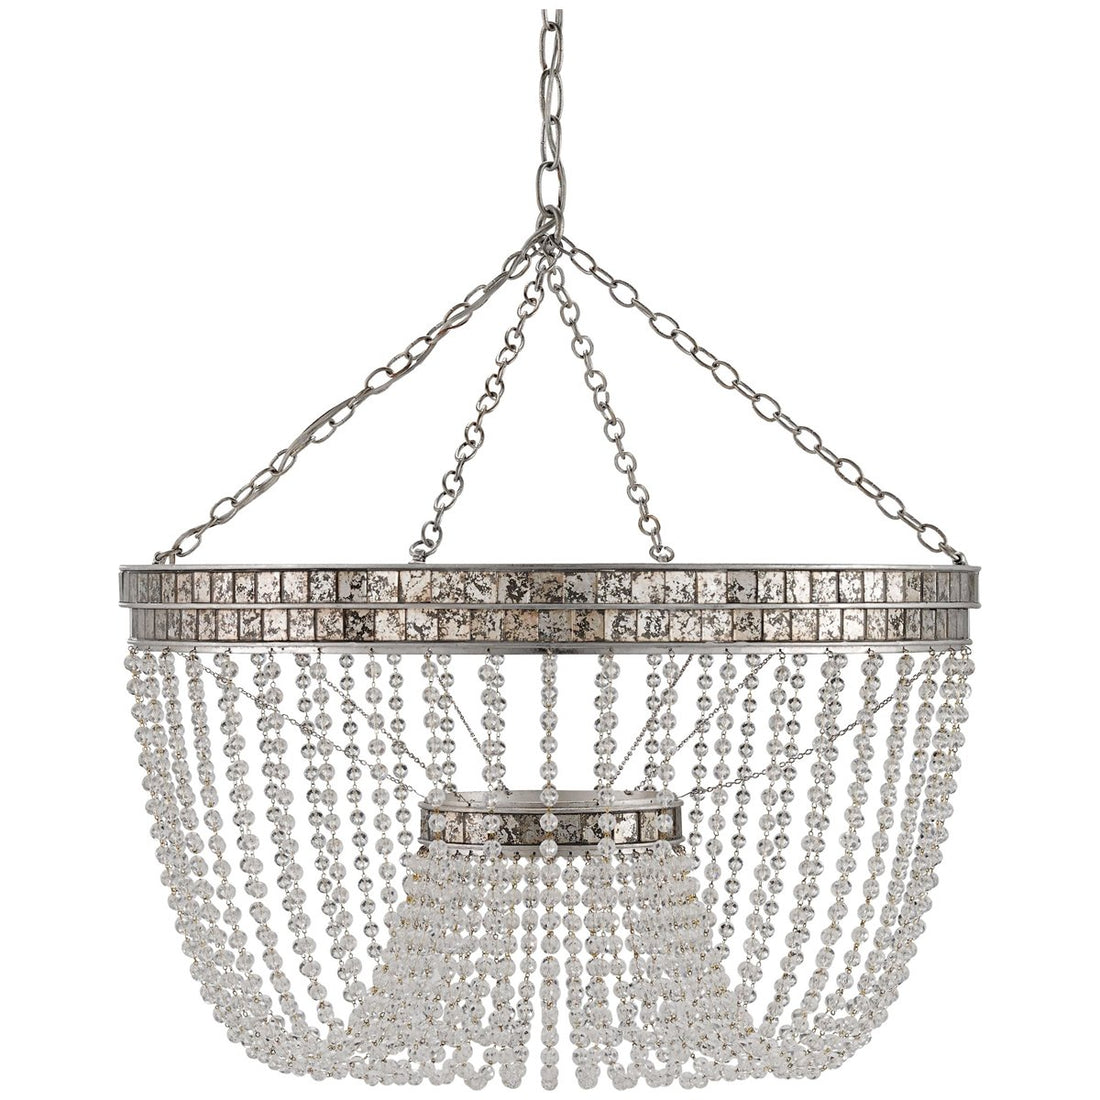 Currey and Company Highbrow Chandelier